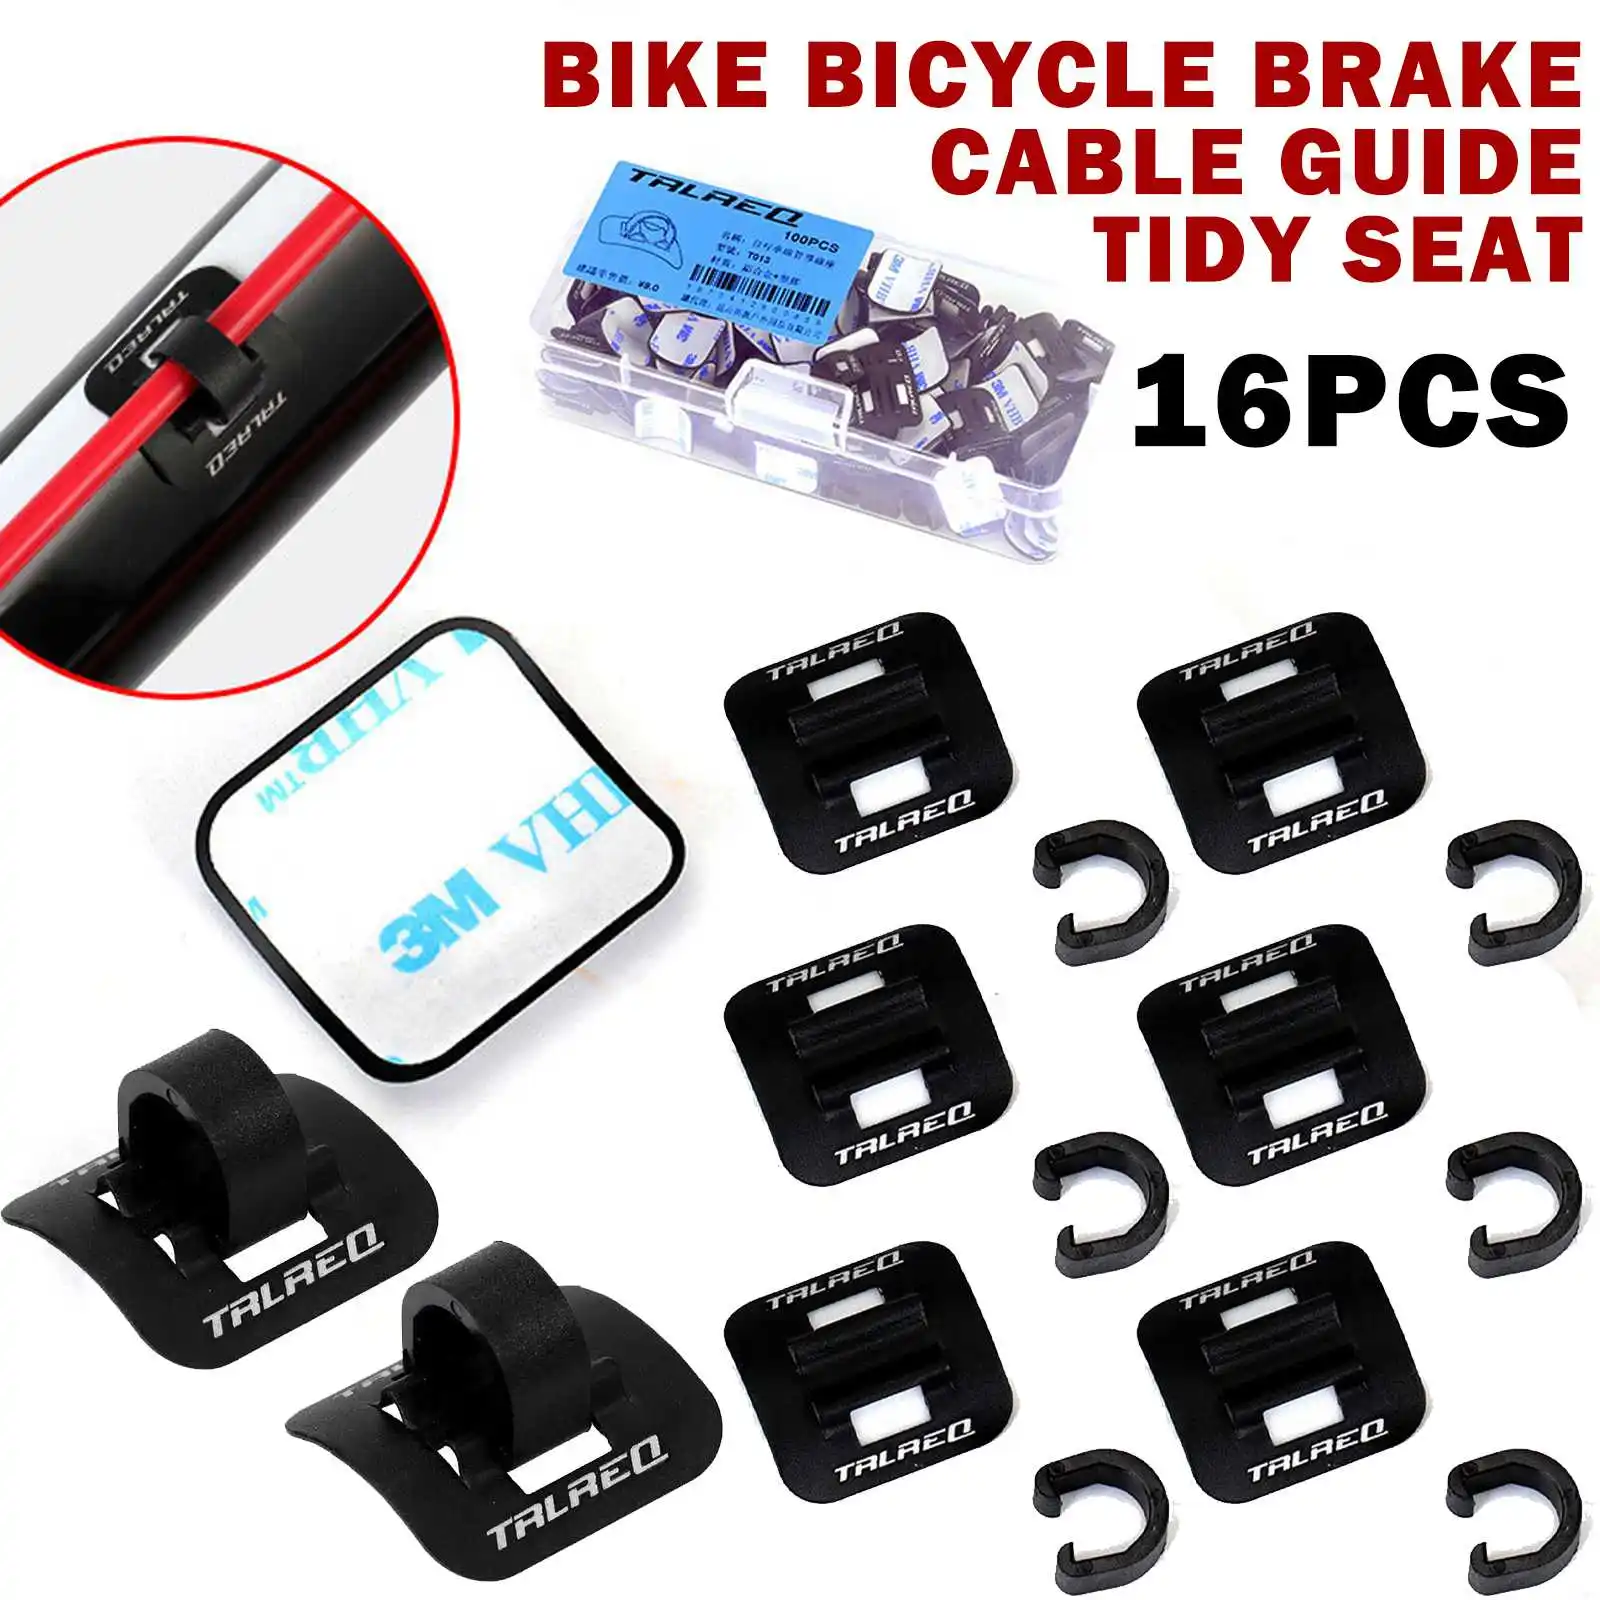 

16pcs Bicycle Cables Fixed Clips Aluminum alloy base Bike Oil Cable Tube Plastic C Shape Shift Brake Guide Clamp Frame Buckle